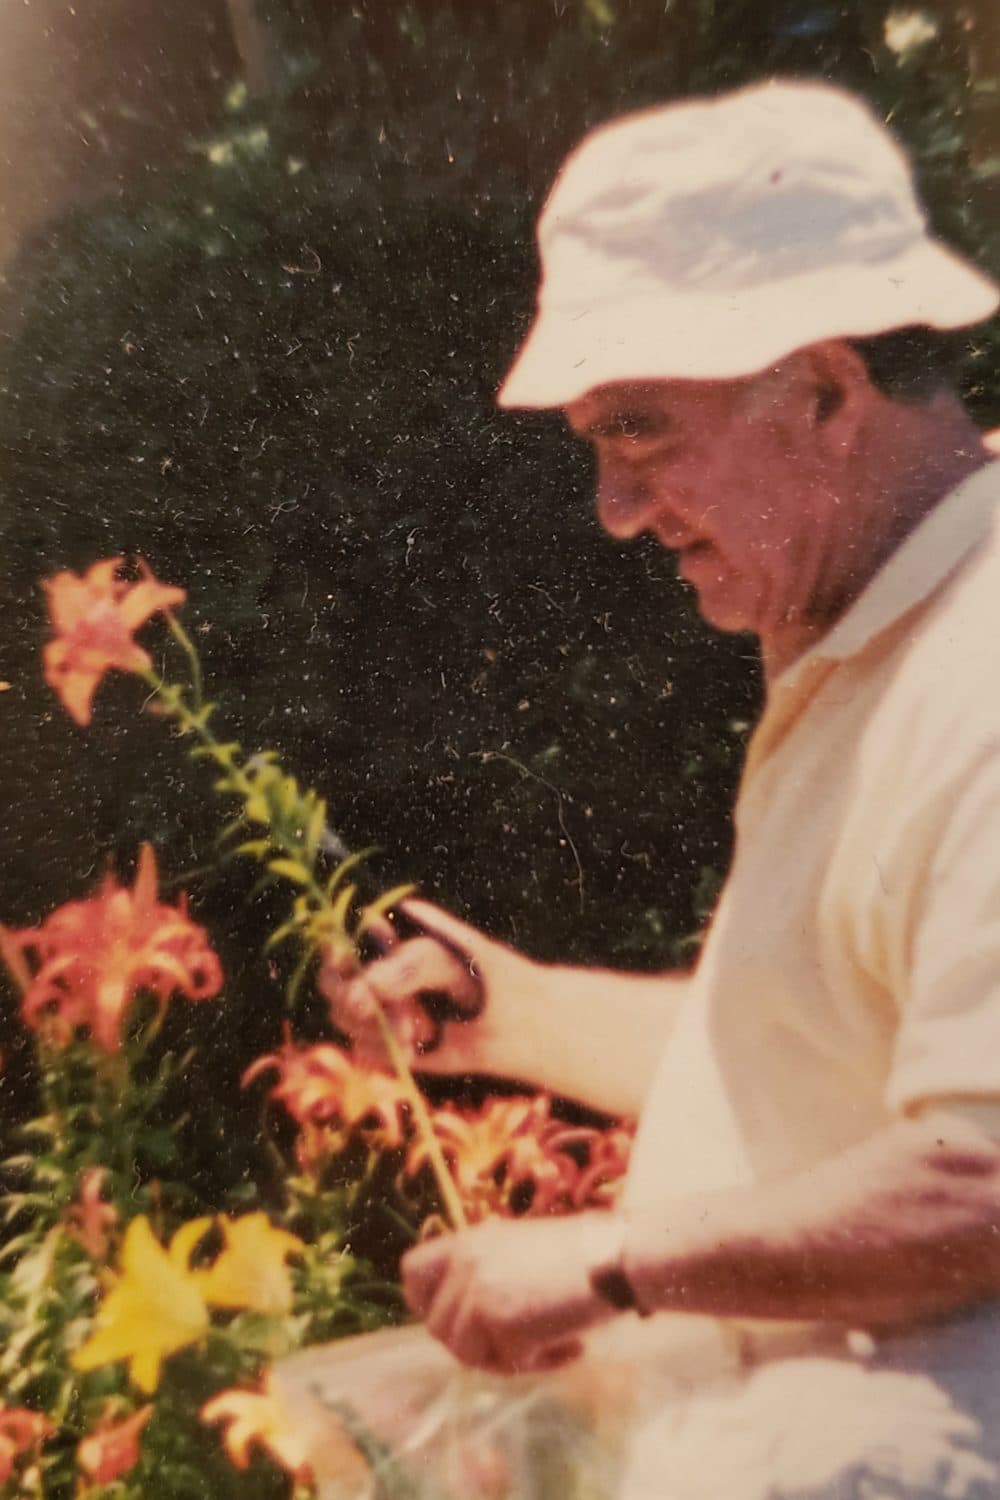 The author's father in his garden in 2000. (Courtesy)